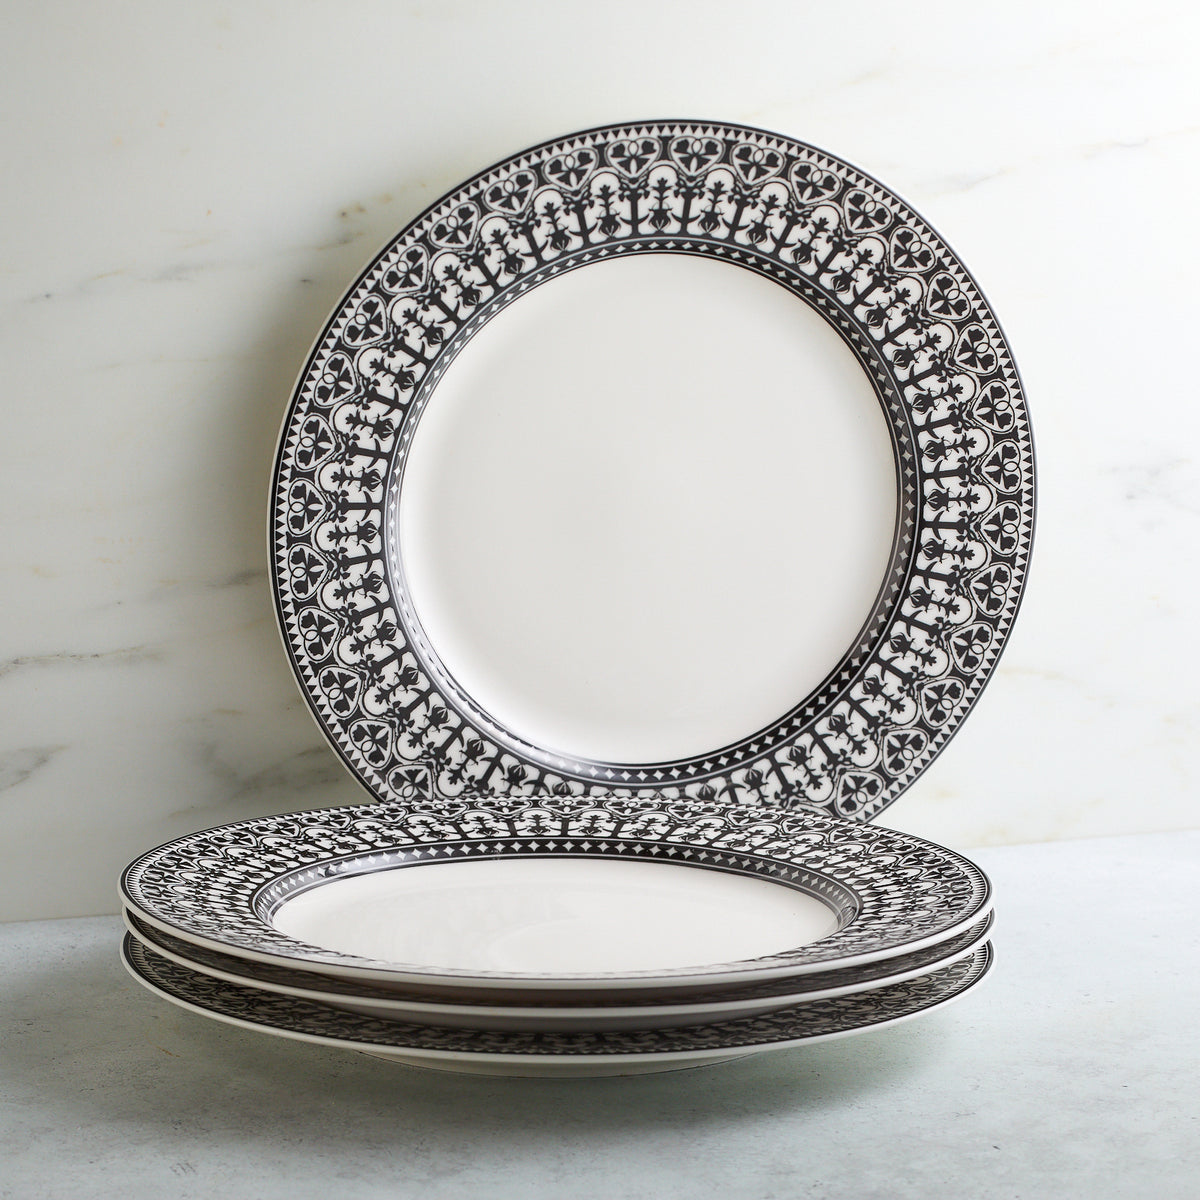 A stack of four white ceramic plates with intricate black, hand-decorated details around the edges, placed against a light background. This Casablanca Rimmed Dinner Plate by Caskata Artisanal Home exudes elegance and sophistication.